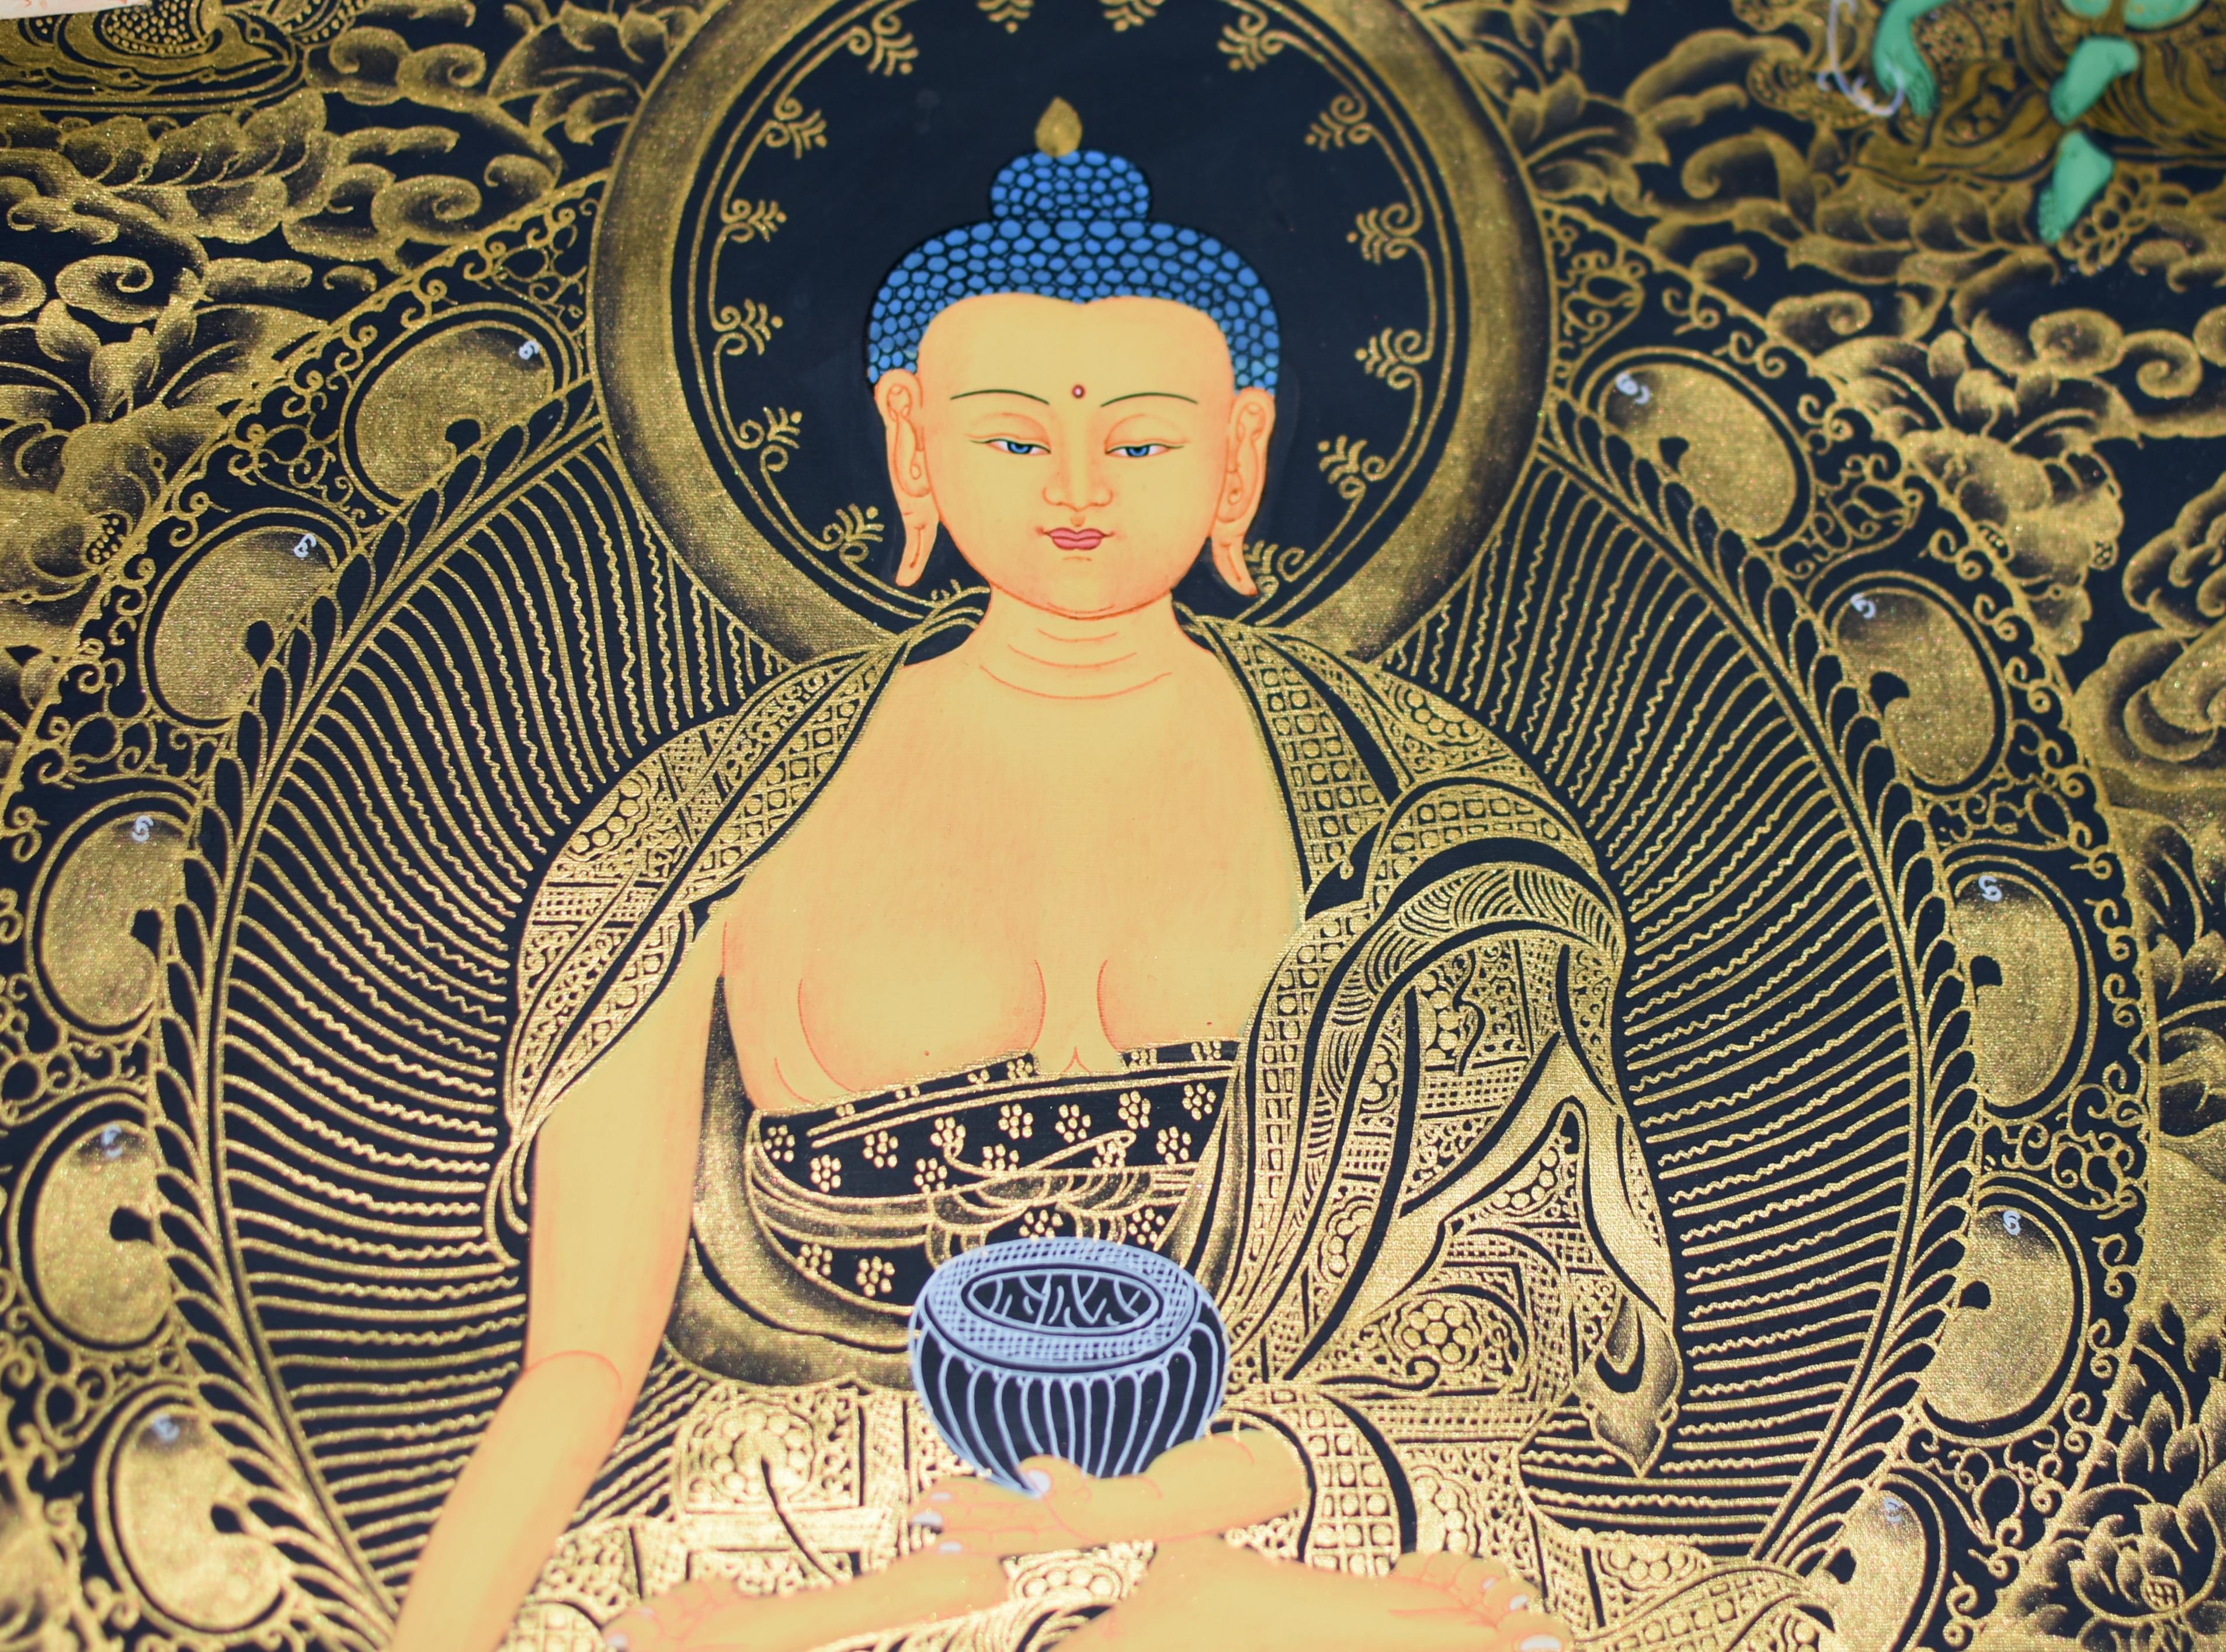 An exquisitely hand painted Tibetan Thangka by one of our master artists in Nepal featuring Buddha Shakyamuni. On lotus throne above ocean waves and an altar bowl overflowing with flowers and treasures, Buddha gazes forward with a halo and